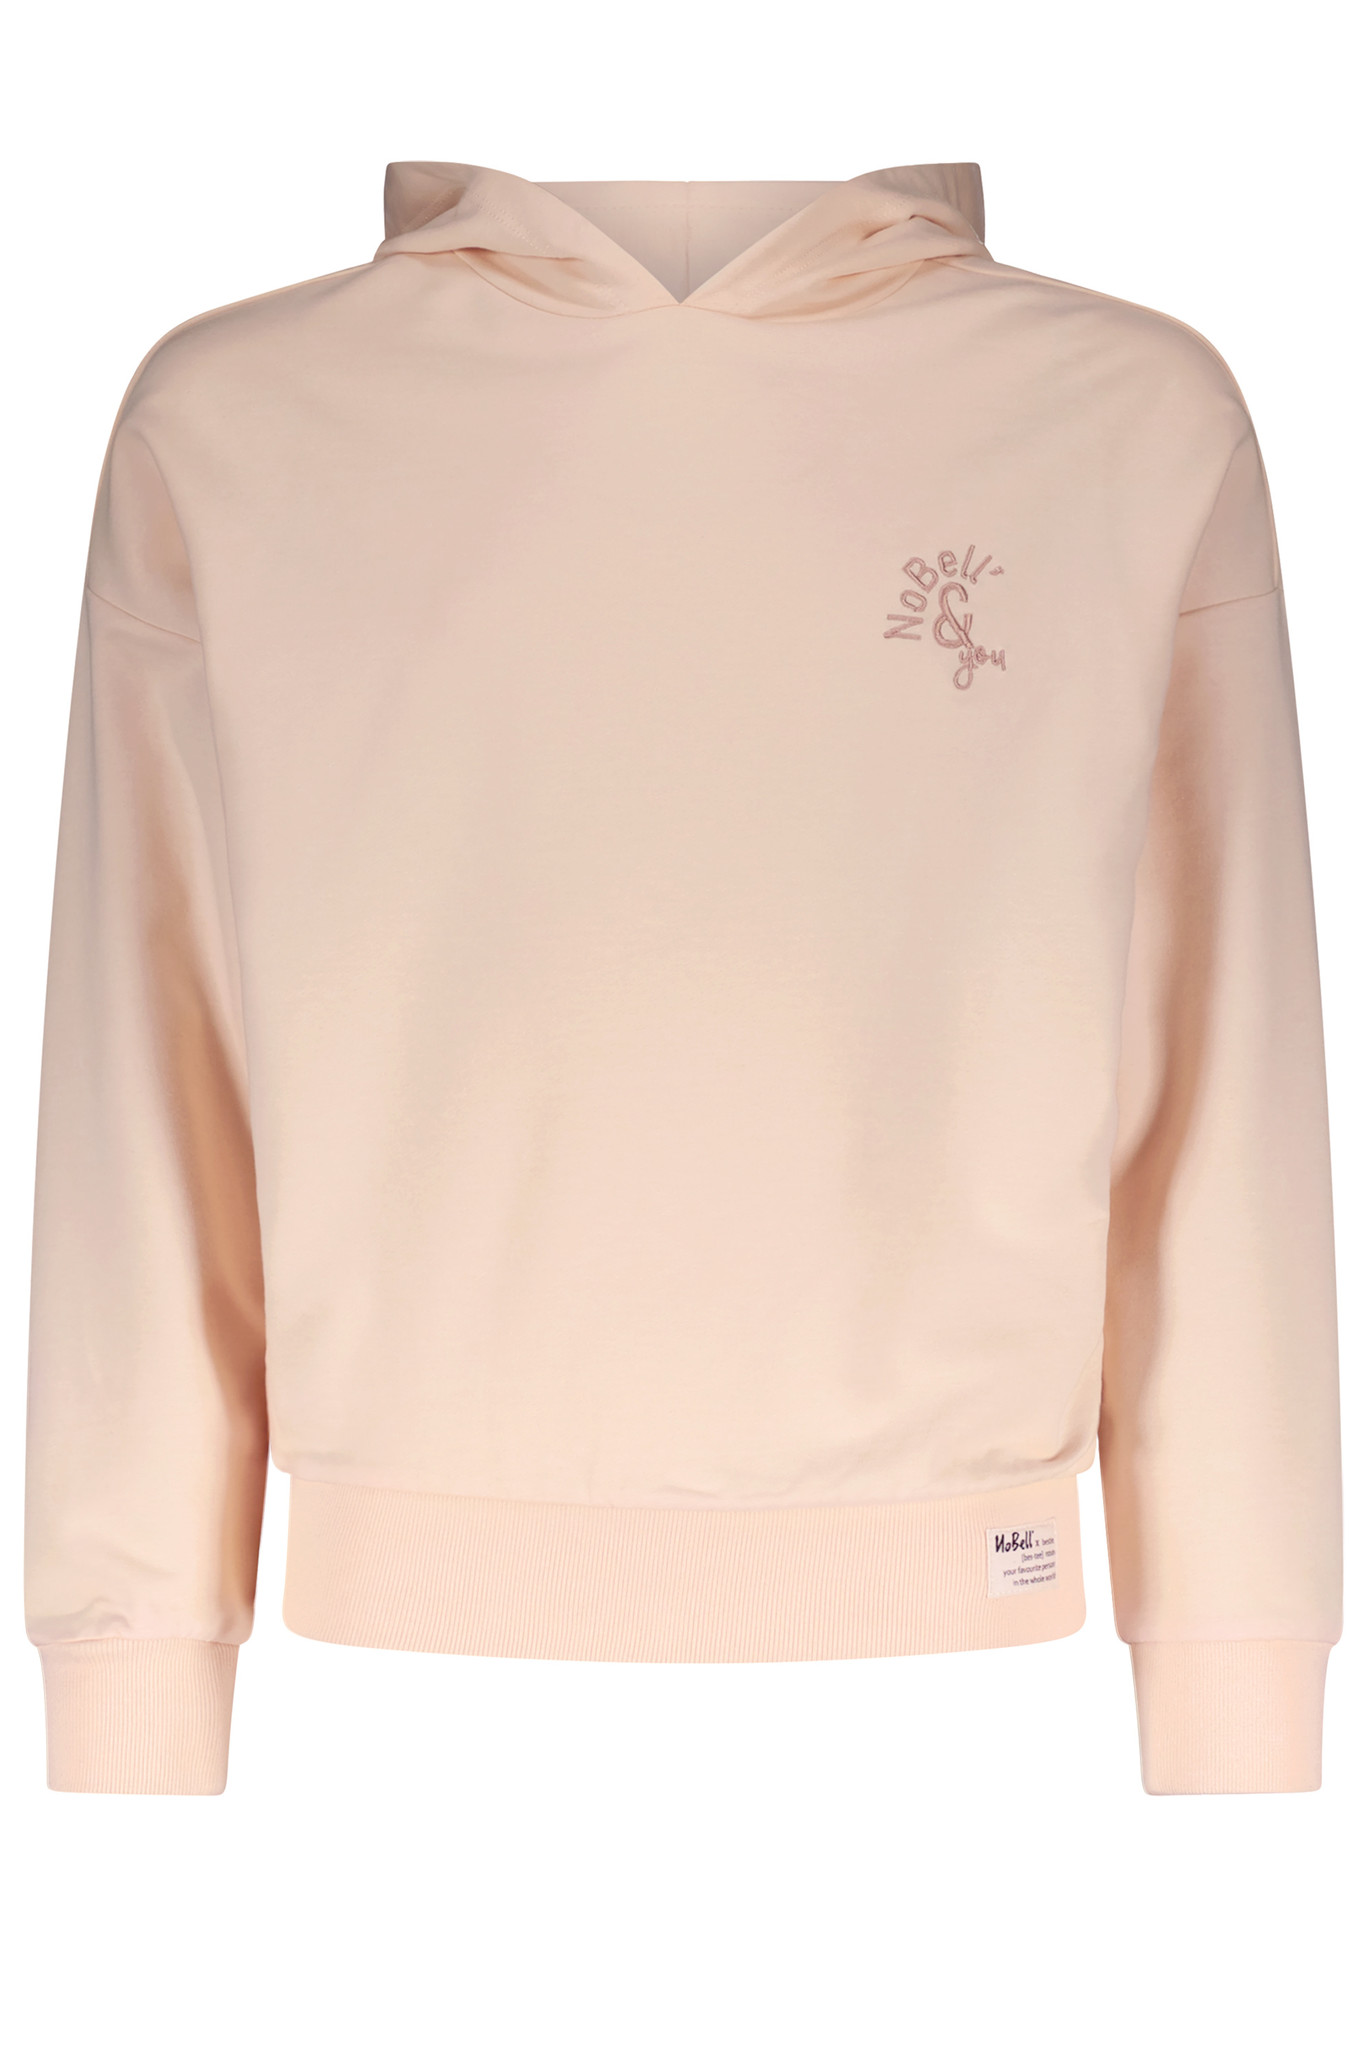 NoBell' - Sweater - Rosy Sand - Maat 146-152